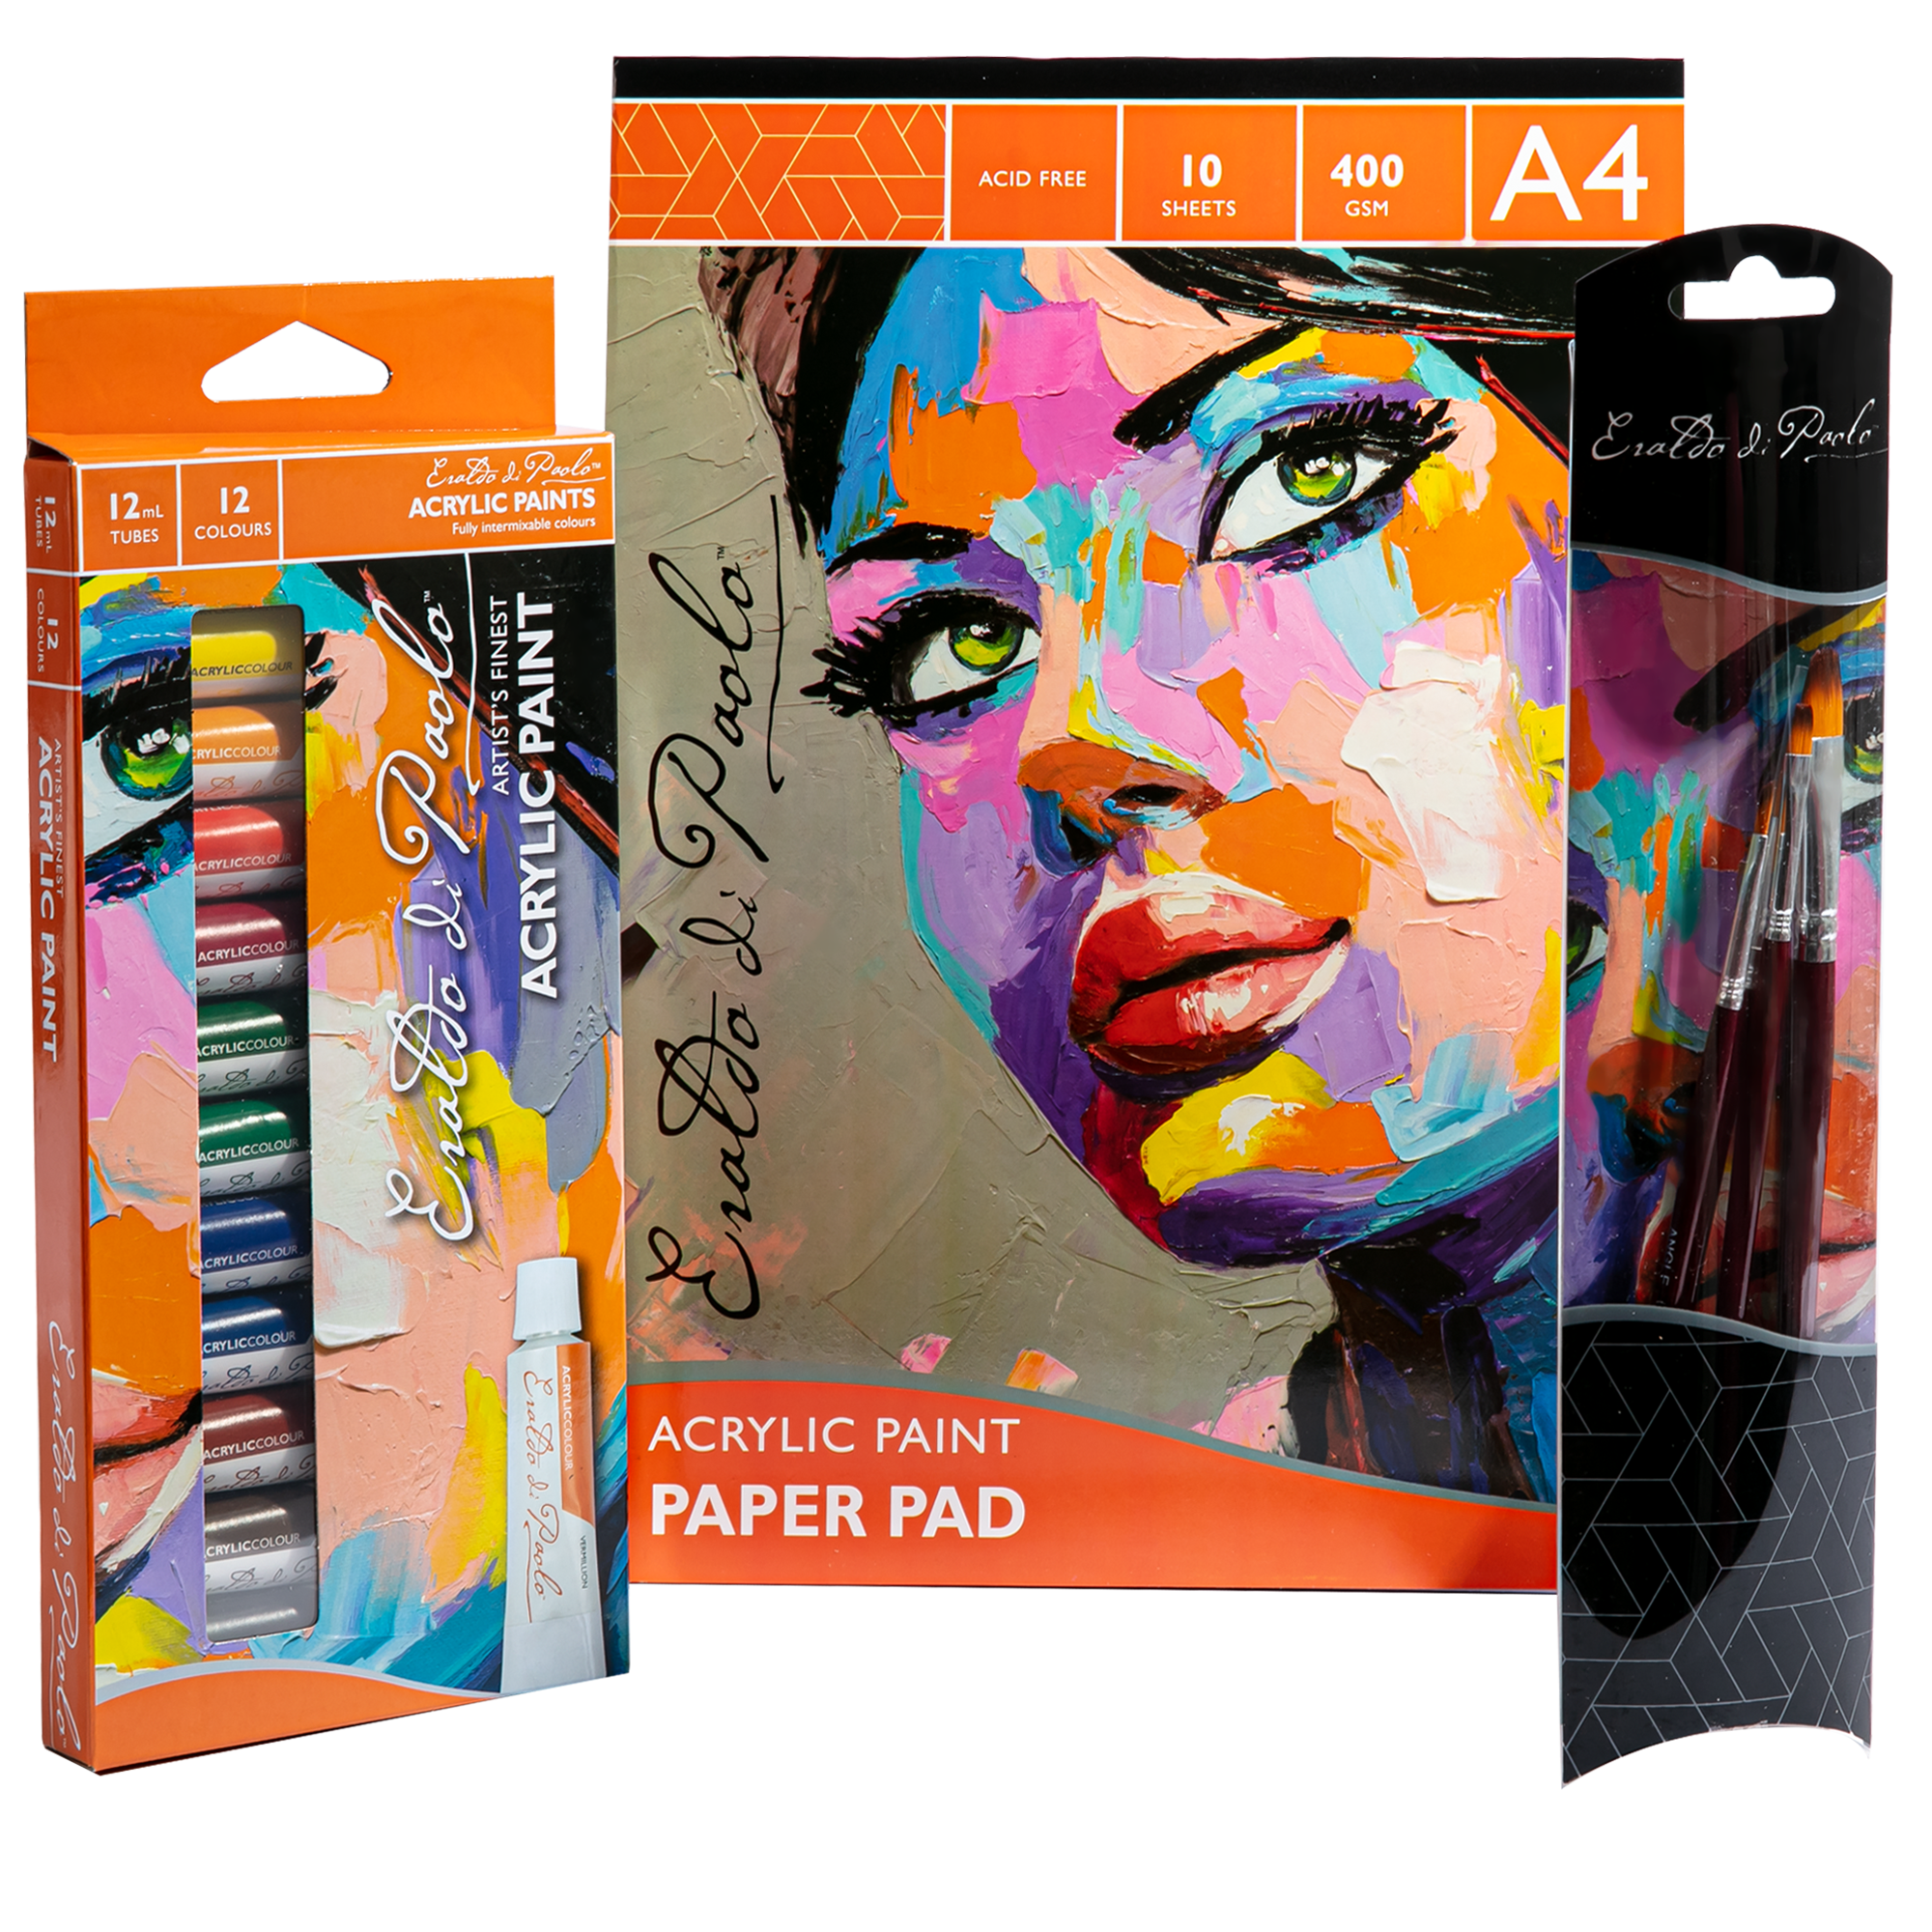 Image of Eraldo di Paolo Acrylic Painting Starter Pack